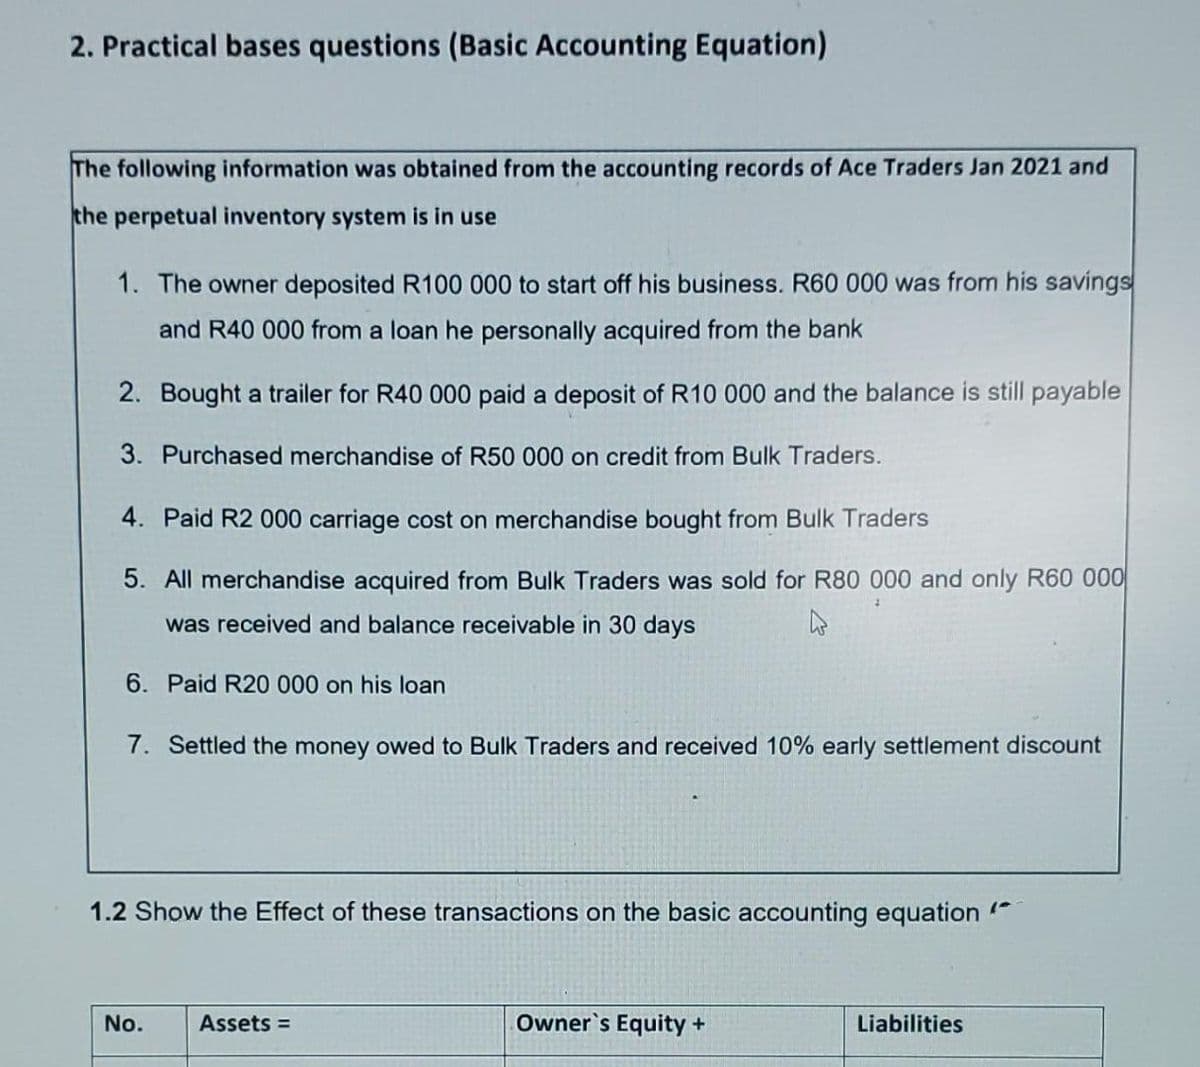 2. Practical bases questions (Basic Accounting Equation)
The following information was obtained from the accounting records of Ace Traders Jan 2021 and
the perpetual inventory system is in use
1. The owner deposited R100 000 to start off his business. R60 000 was from his savings
and R40 000 from a loan he personally acquired from the bank
2. Bought a trailer for R40 000 paid a deposit of R10 000 and the balance is still payable
3. Purchased merchandise of R50 000 on credit from Bulk Traders.
4. Paid R2 000 carriage cost on merchandise bought from Bulk Traders
5. All merchandise acquired from Bulk Traders was sold for R80 000 and only R60 000
was received and balance receivable in 30 days
6. Paid R20 000 on his loan
7. Settled the money owed to Bulk Traders and received 10% early settlement discount
1.2 Show the Effect of these transactions on the basic accounting equation "
No.
Assets =
Owner's Equity +
Liabilities